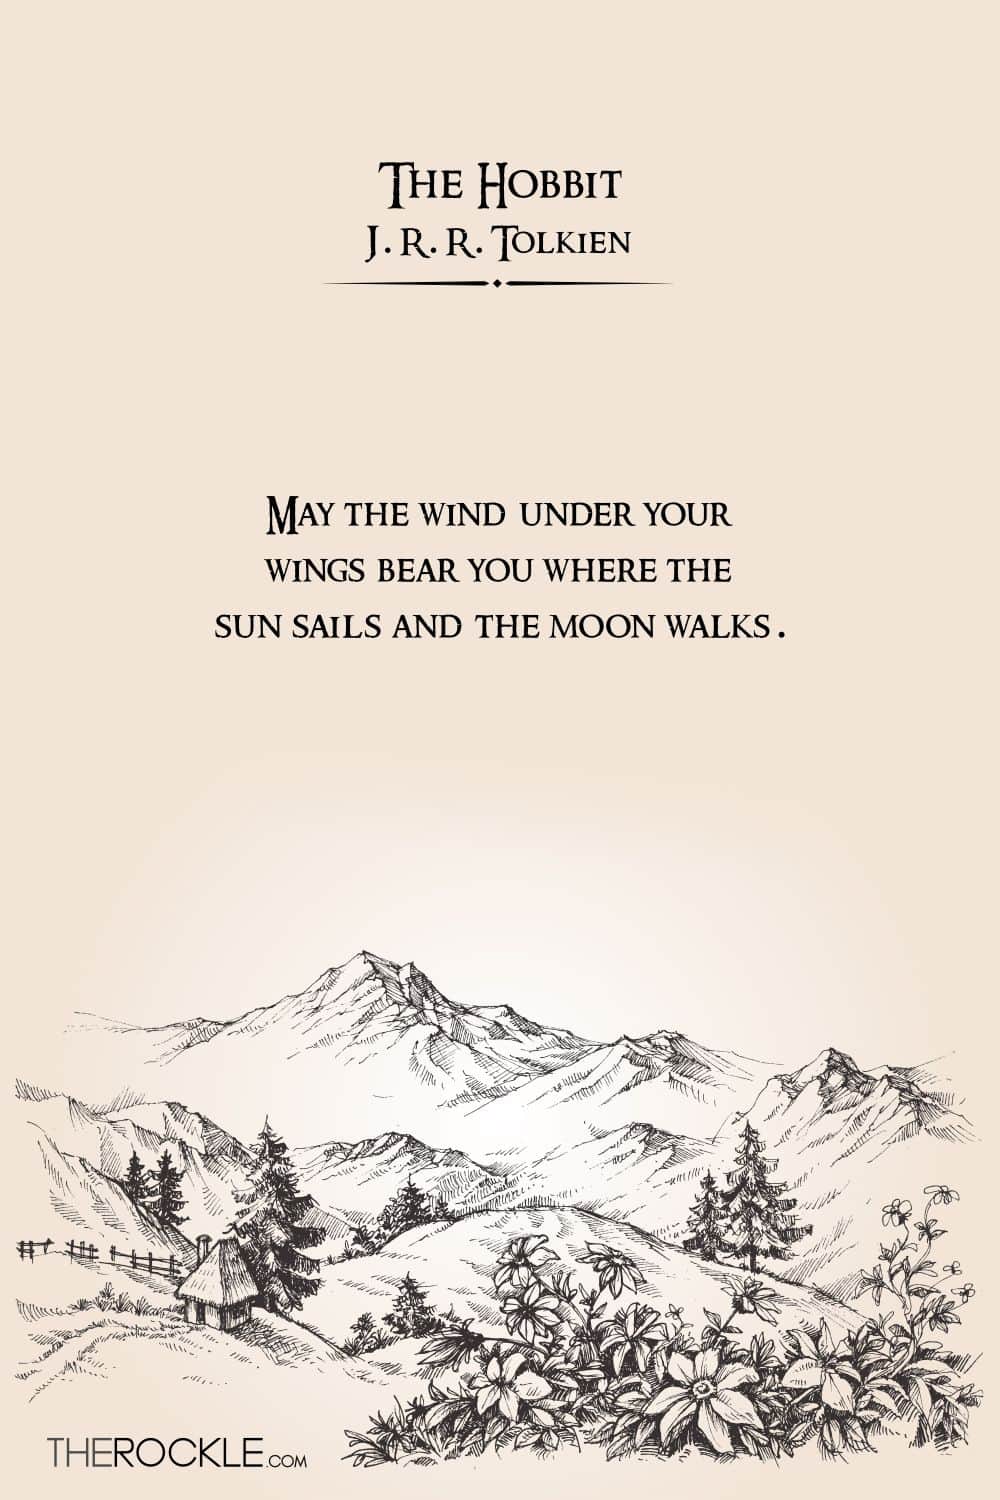 Tolkien's quote about an adventurous journey